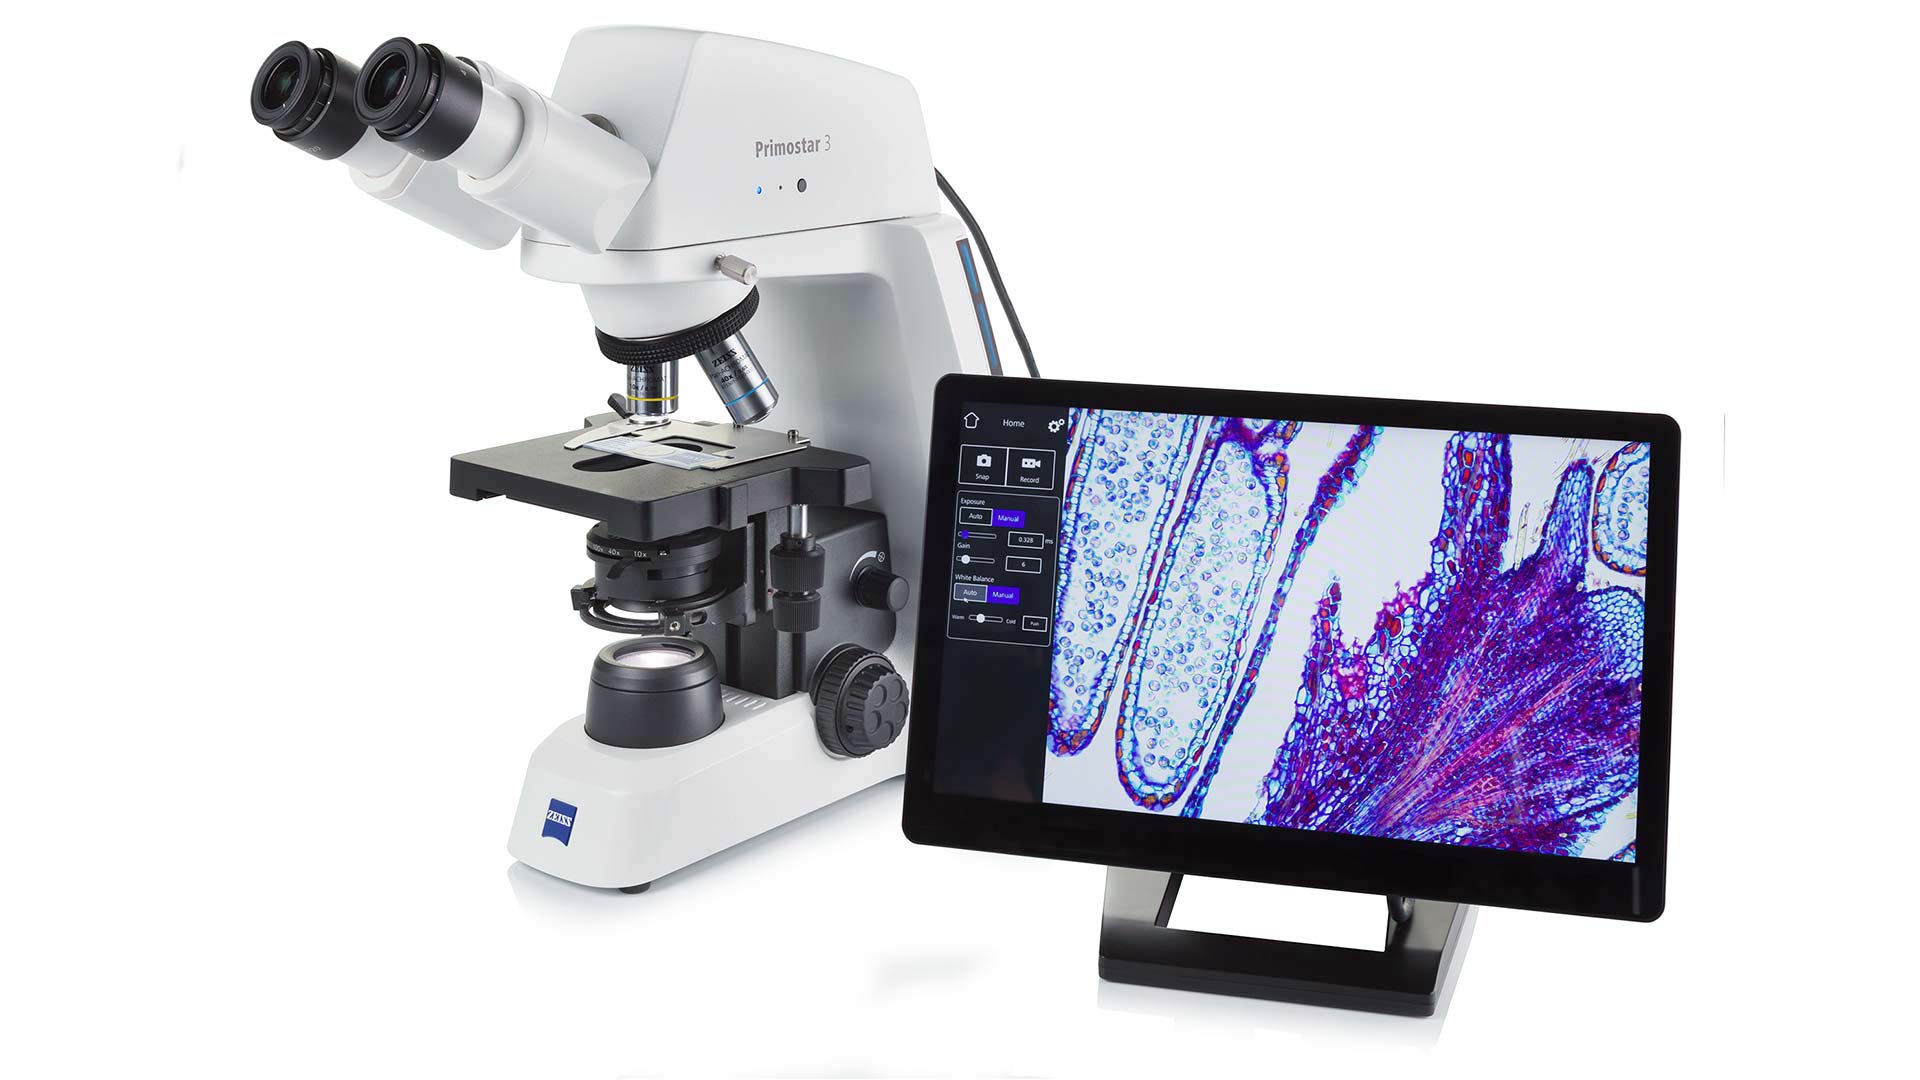 Microscope – New and user friendly ZEISS Primostar